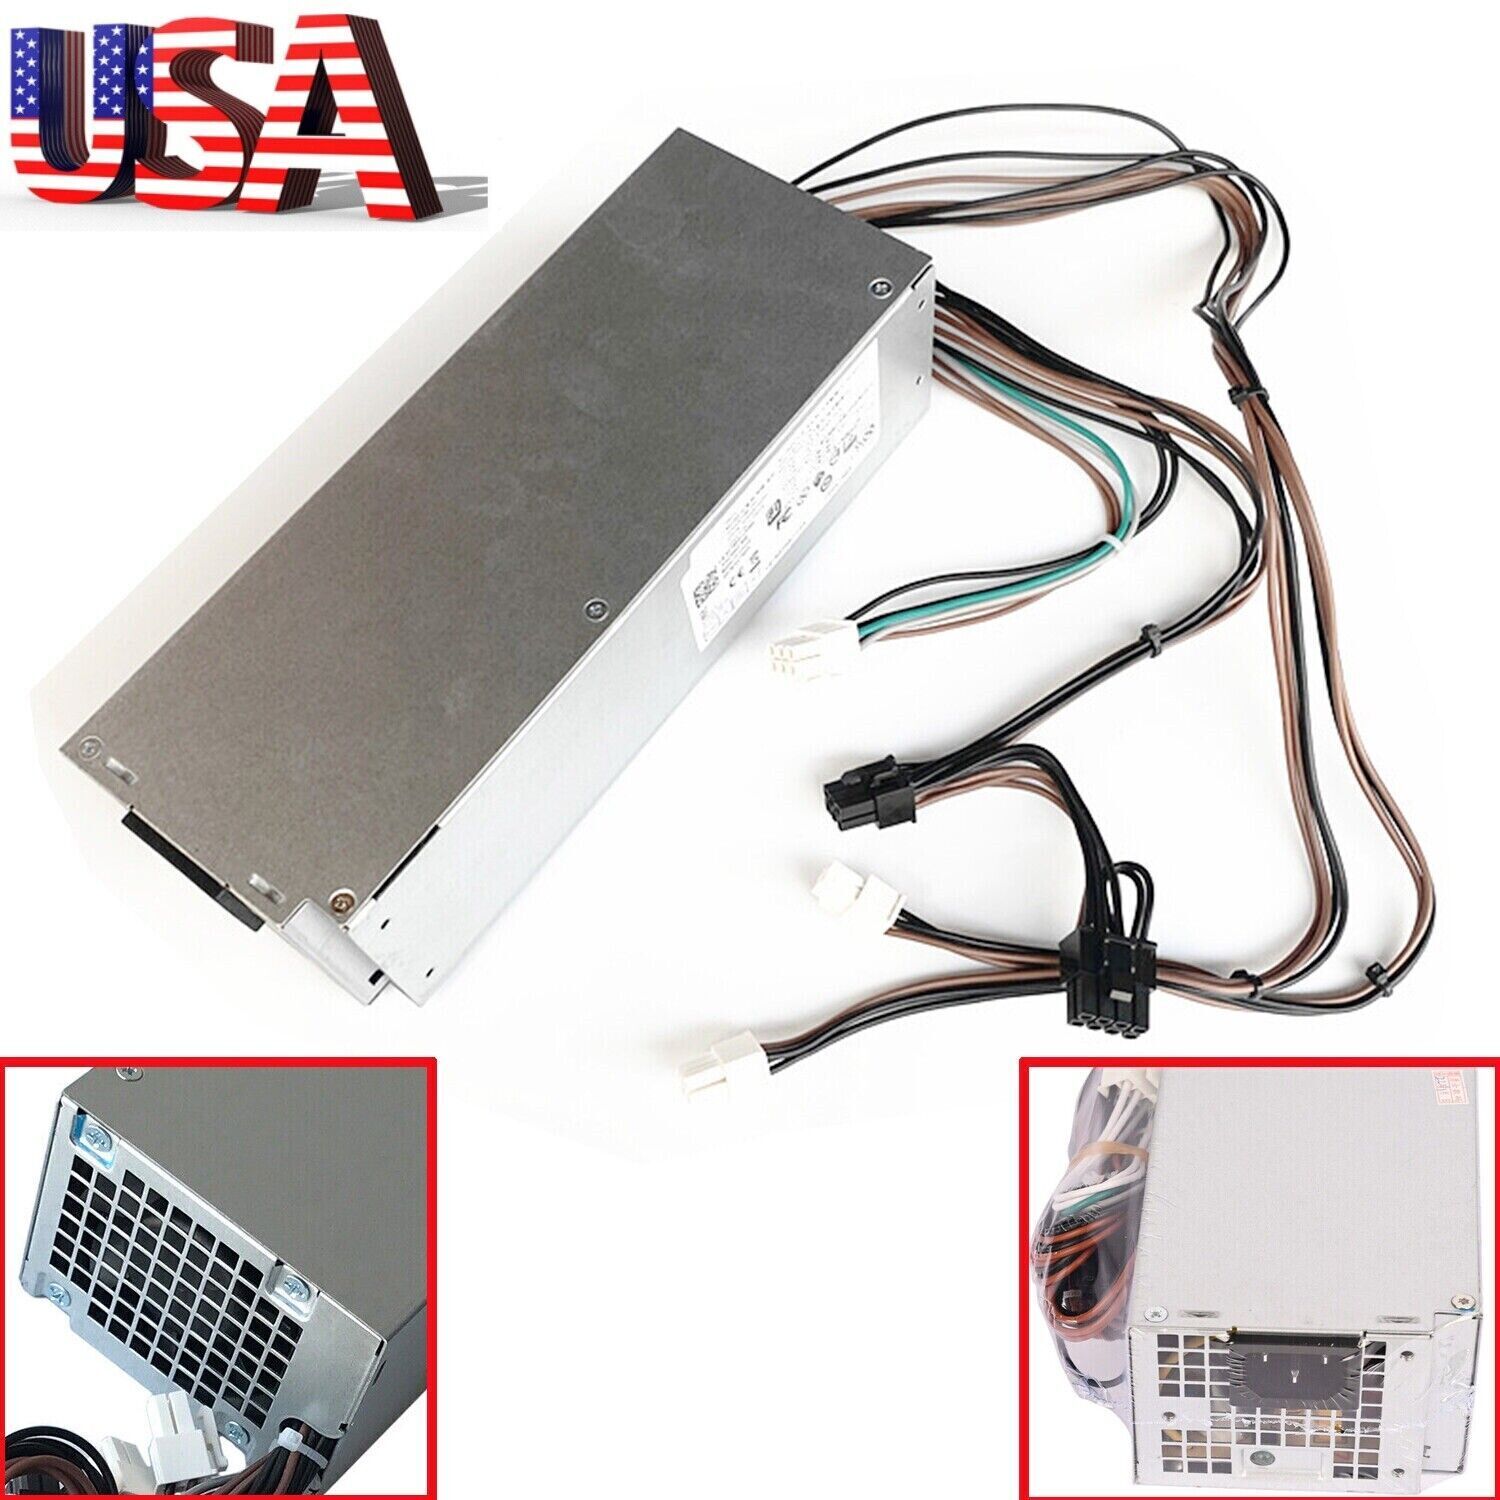 New Power Supply PSU For Dell G5 XPS 8940 7060 5060 G5-5090 500W H500EPM-00 US